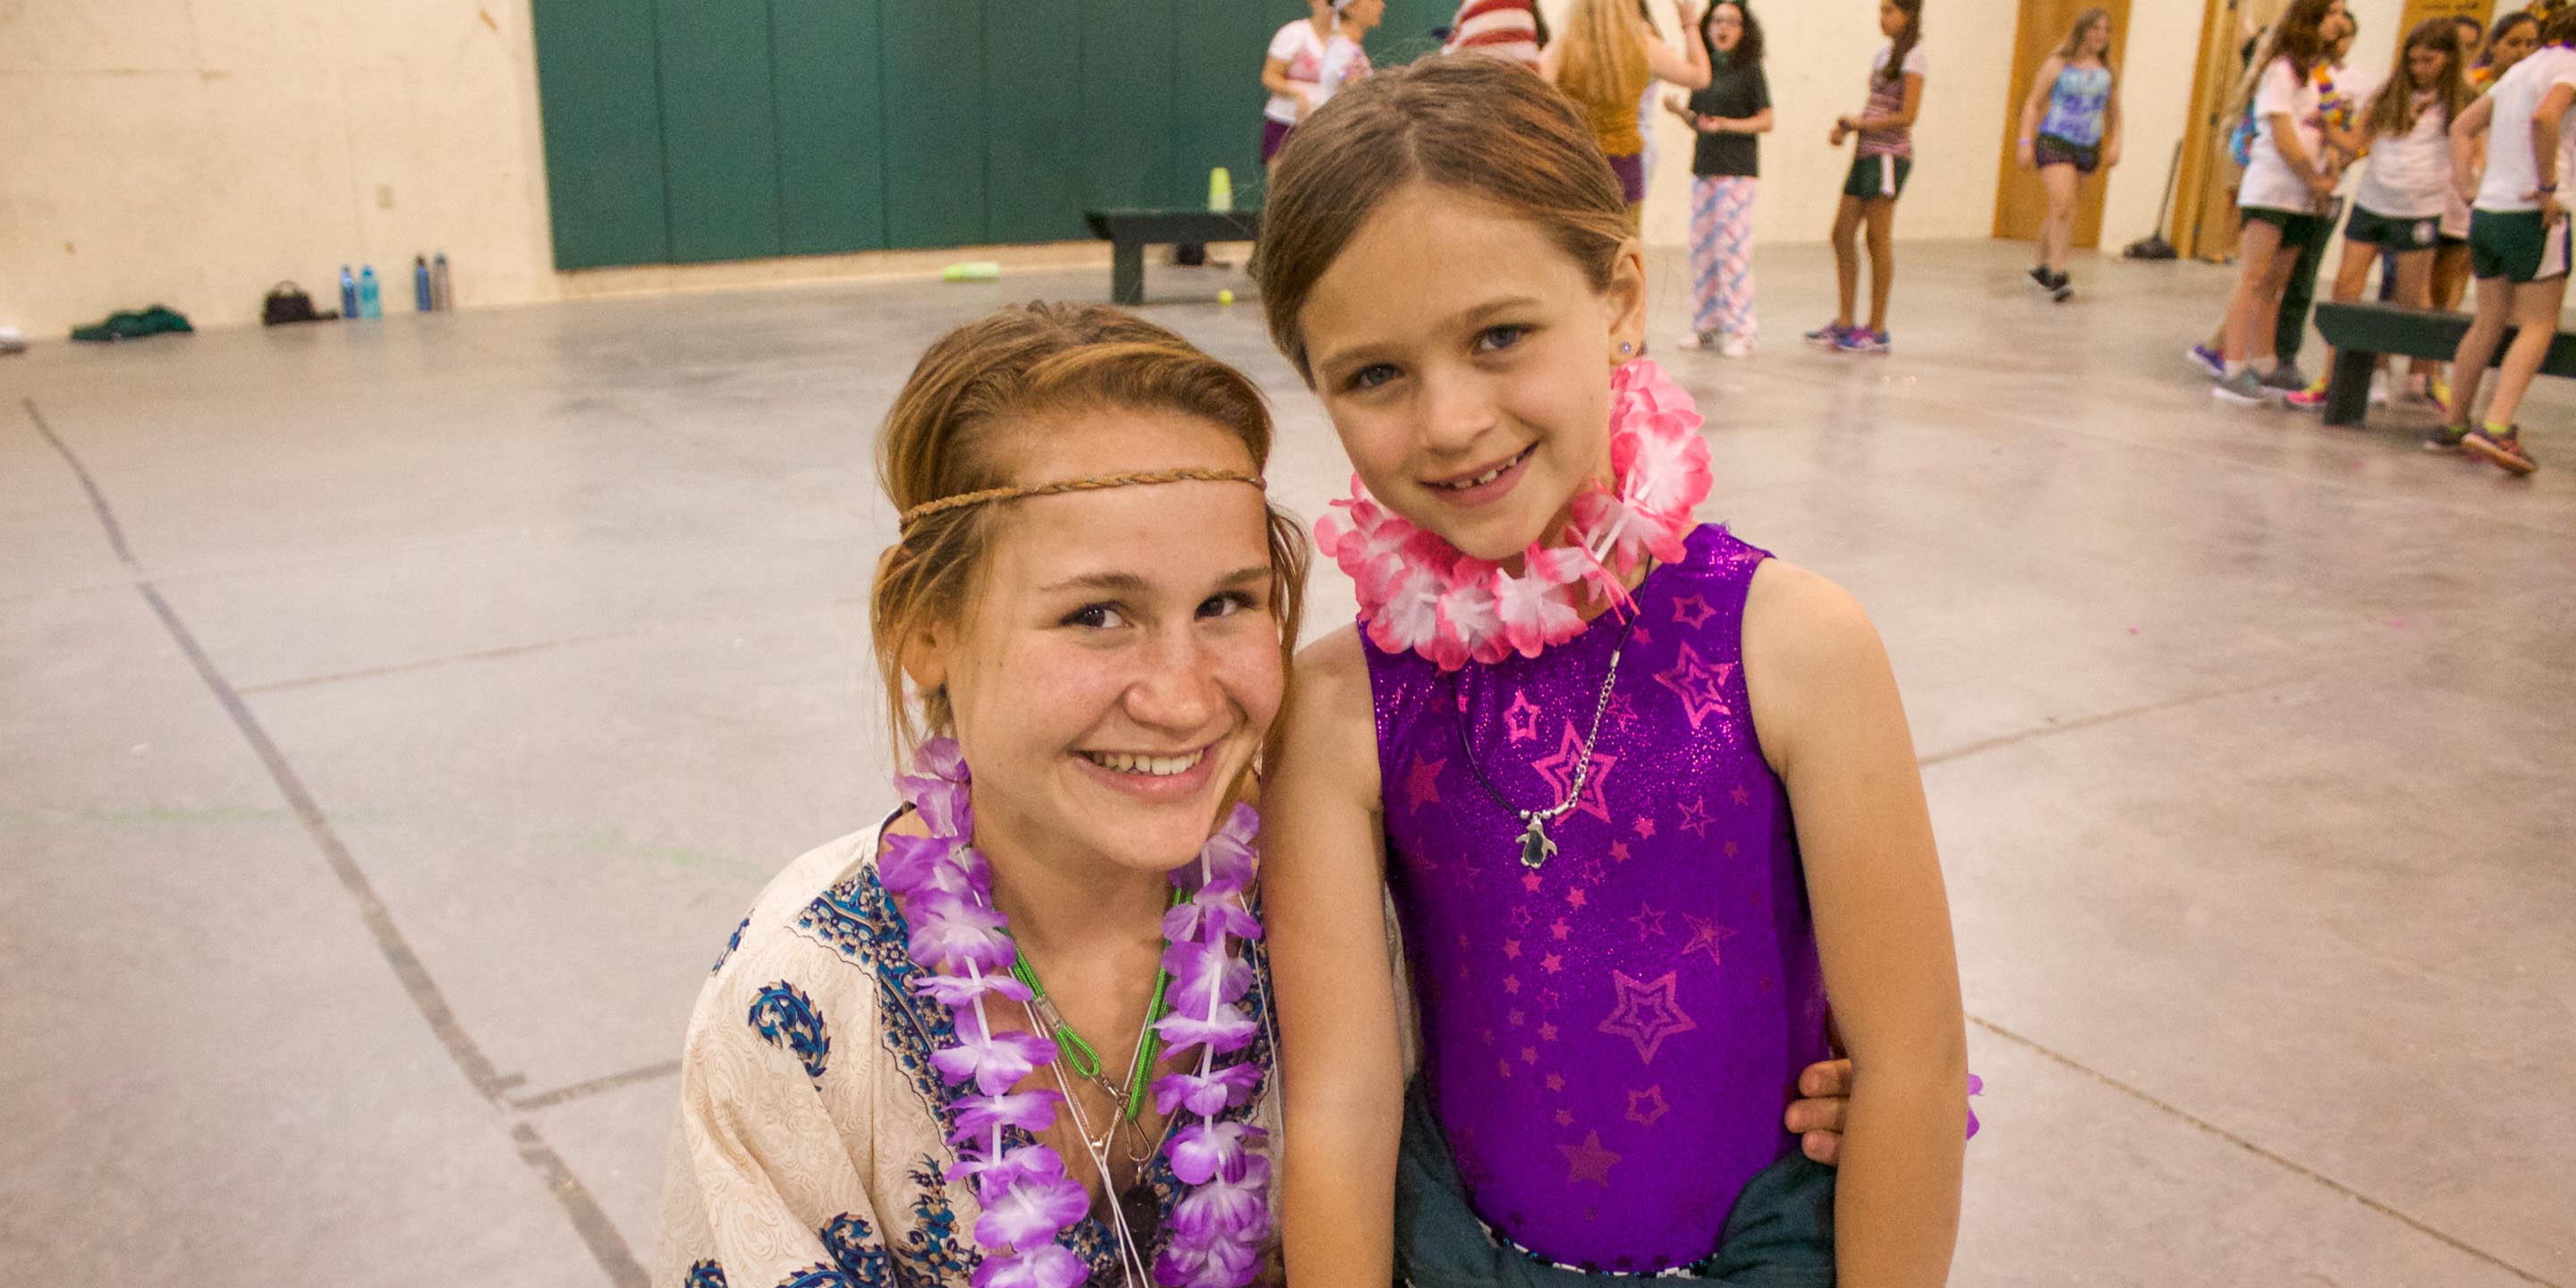 Staff with young camper dressed in Hawaiian leis